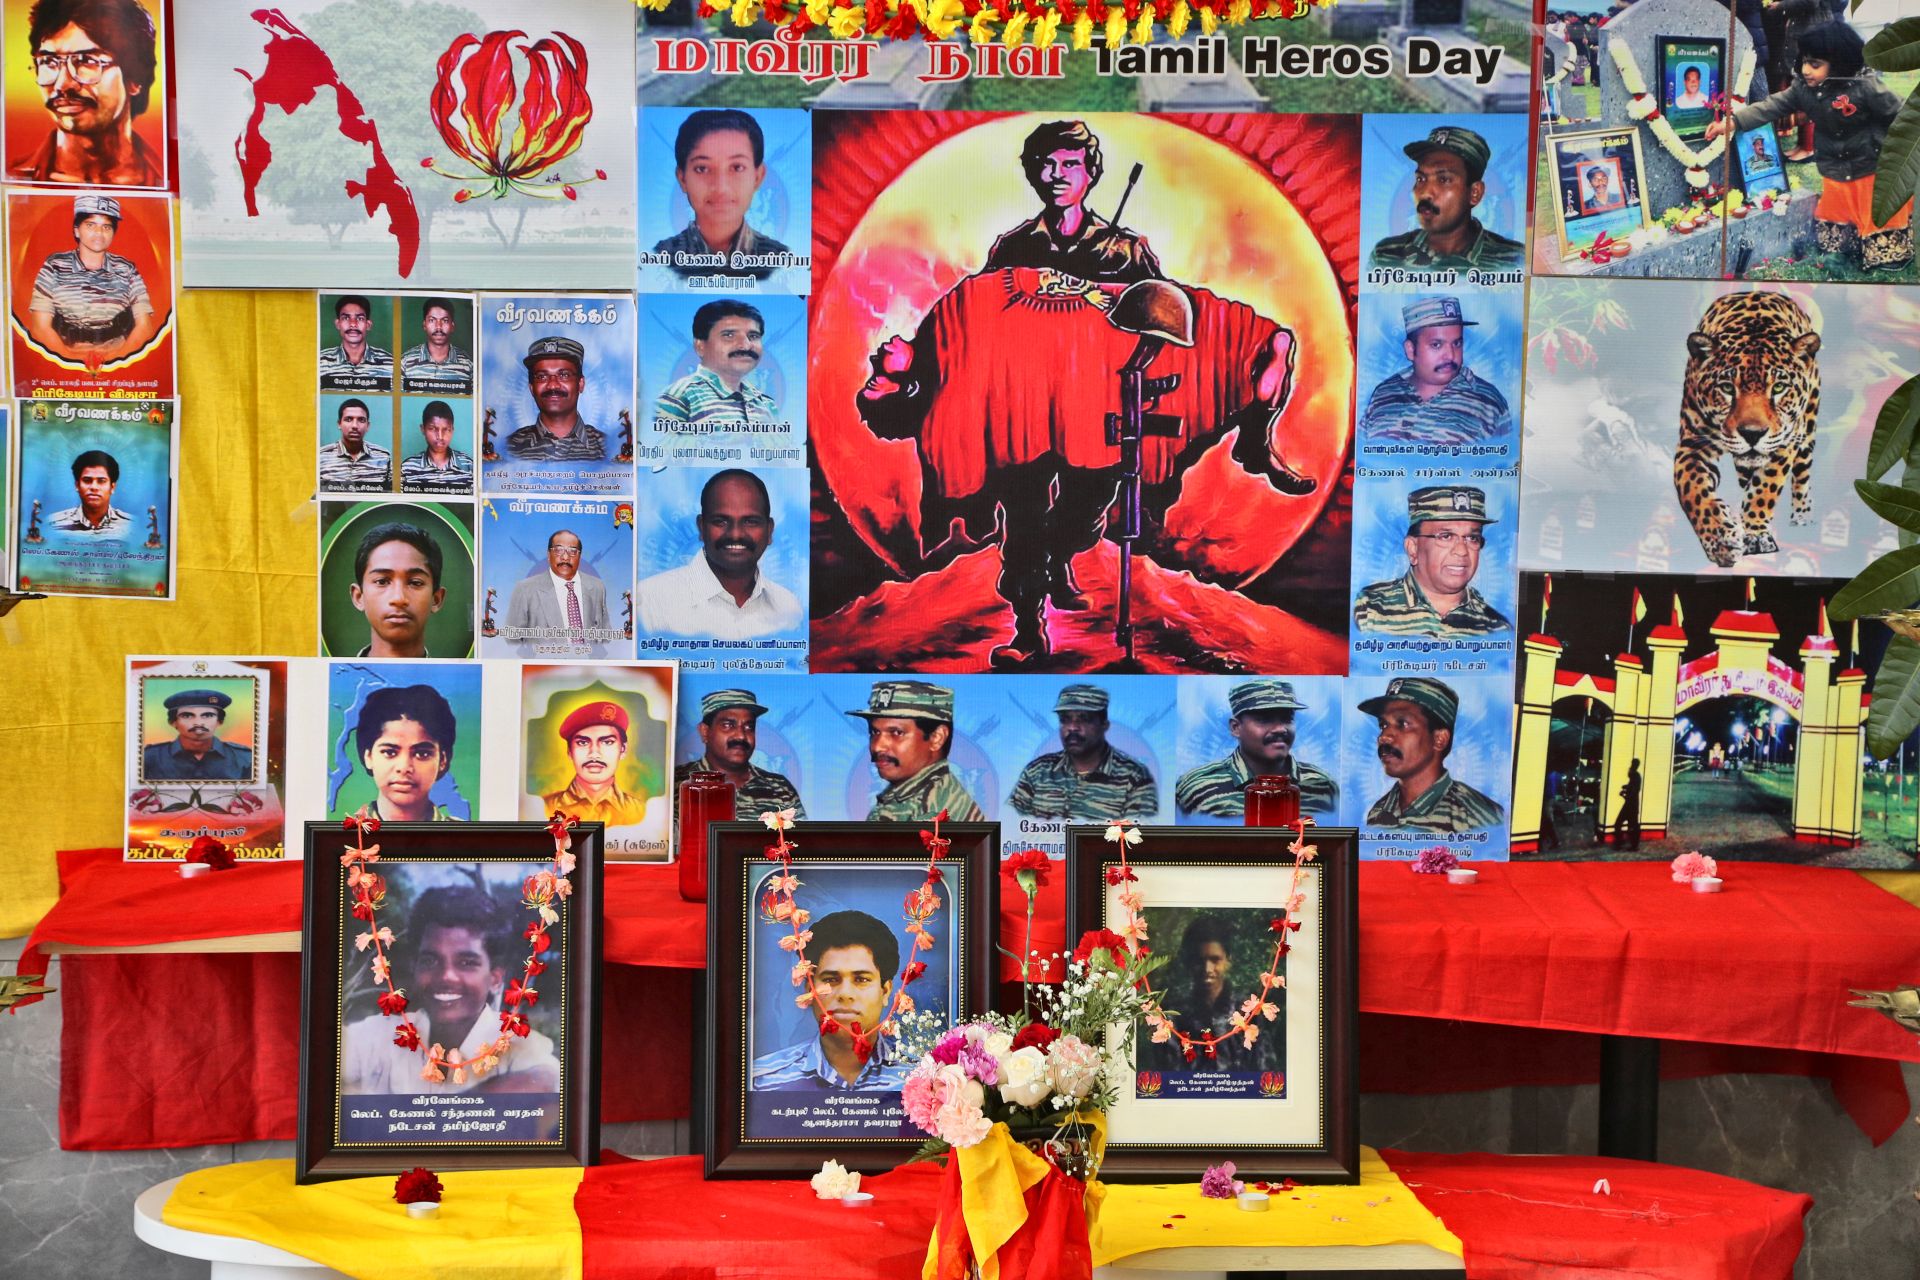 In Sri Lanka, Tamils Are Divided Over the Tigers’ Militant Legacy